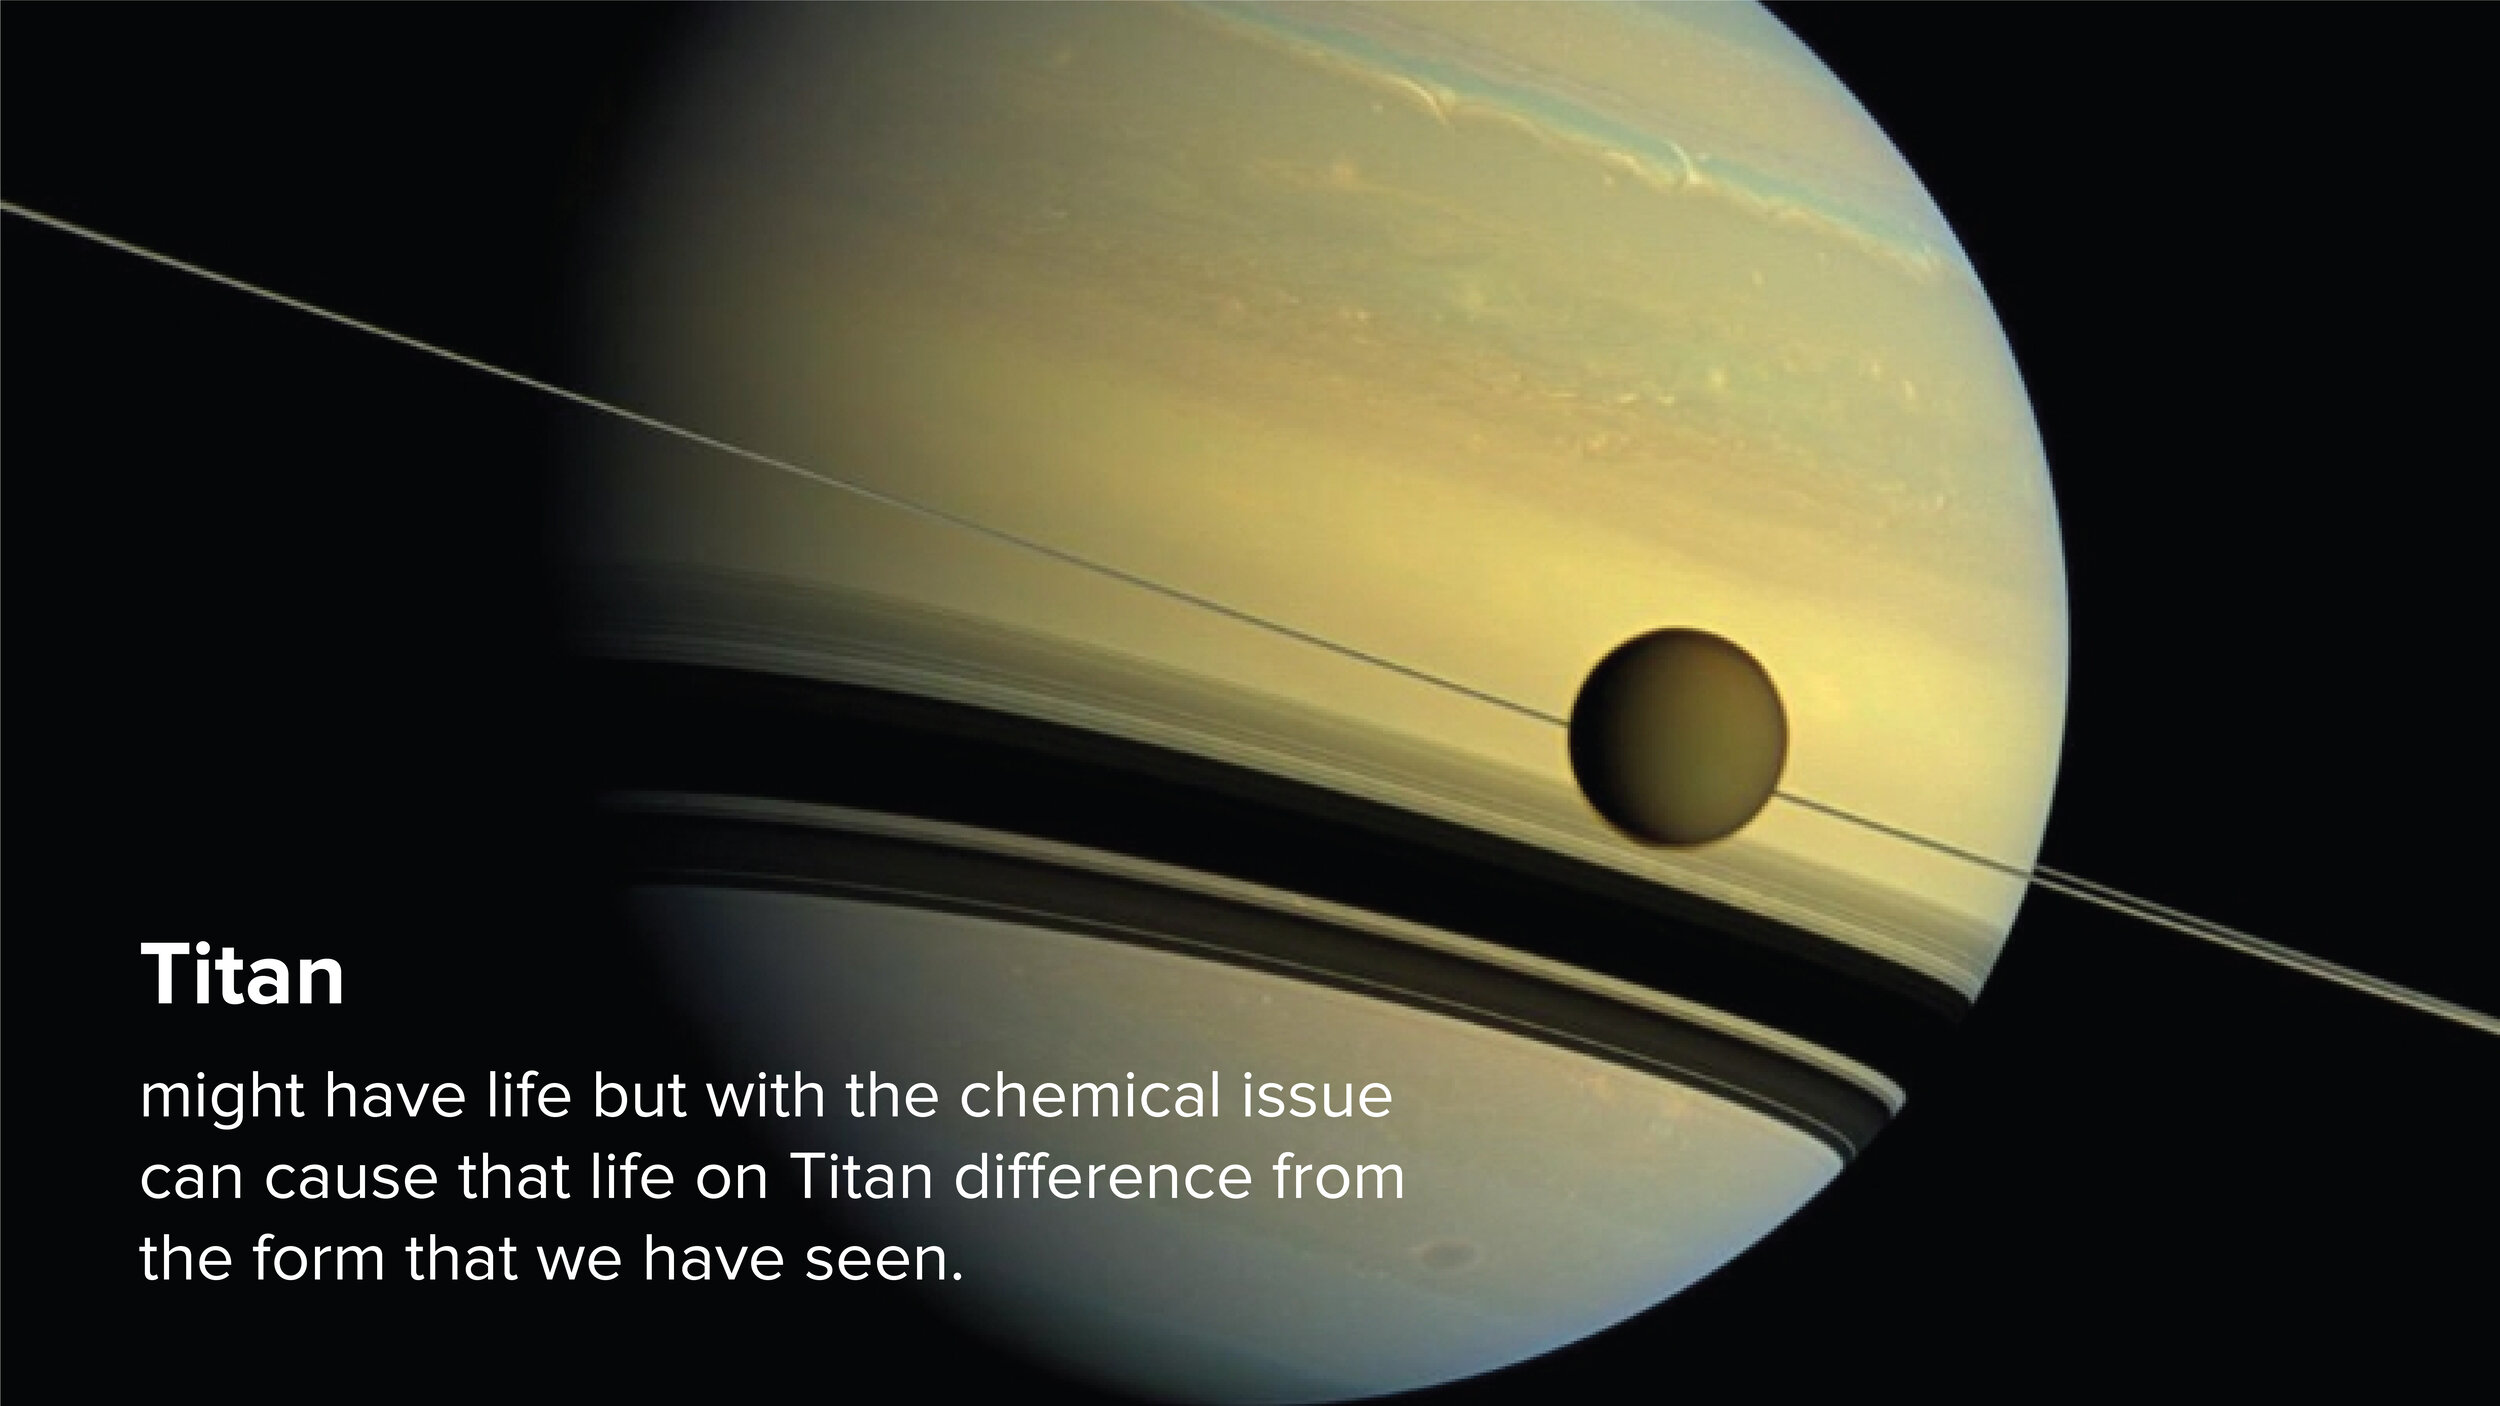  NASA confirmed that Titan is capable of sustaining life, but with high chances that it would be life of a different kind to Earth. 